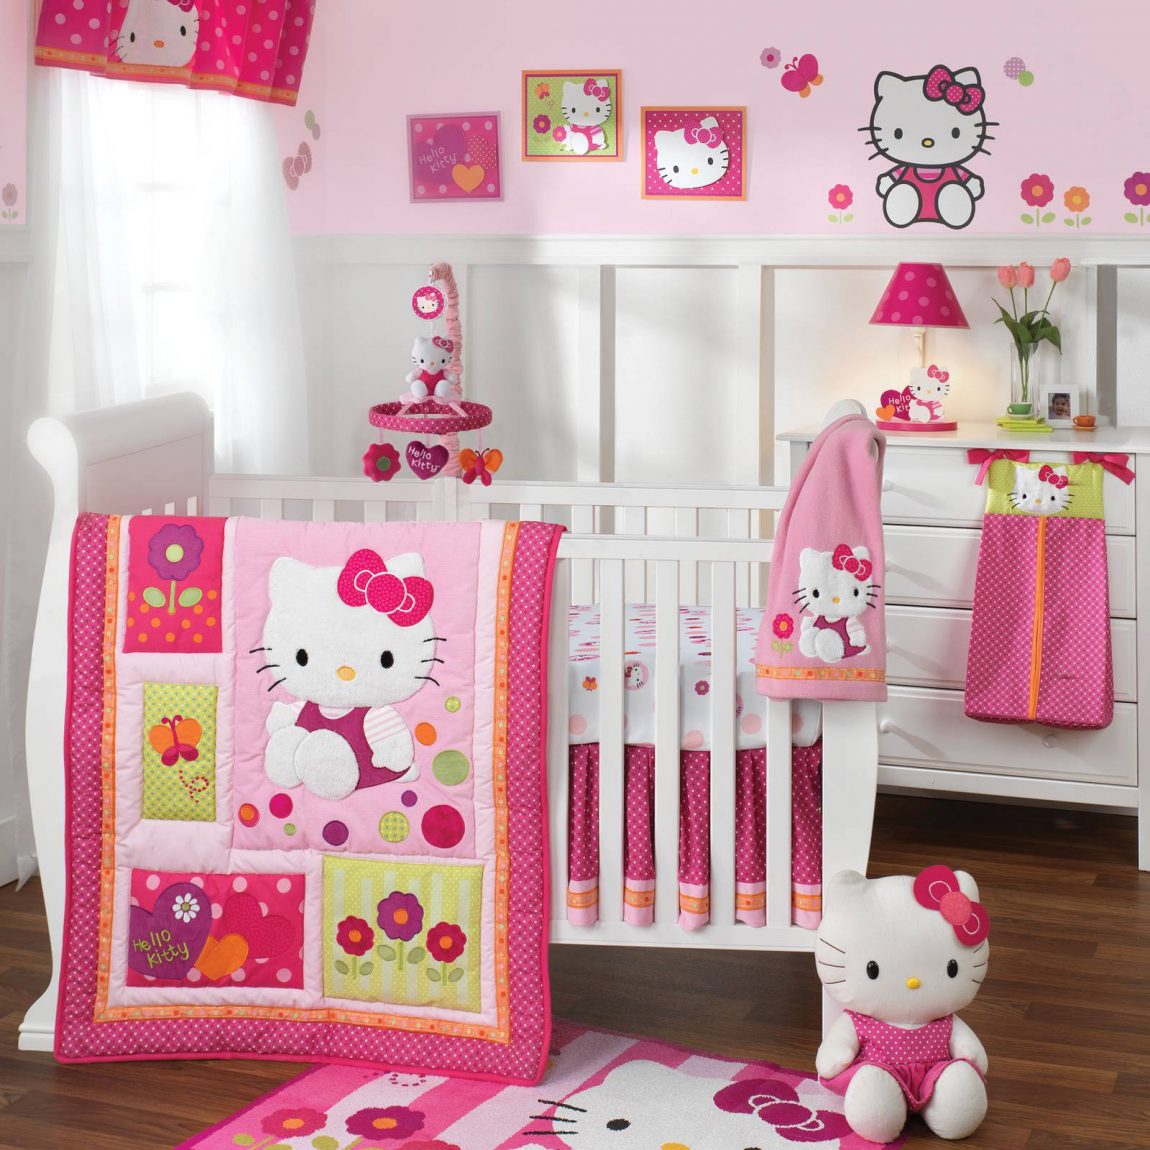 Bedroom Large-size Cute Baby Bedroom With Hello Kitty DesignDollBlanketPictureWhite Baby NurseryToysLampHand Wipes FlowerRugChest Of Drawer White Wall And Laminated Wooden Floor Bedroom